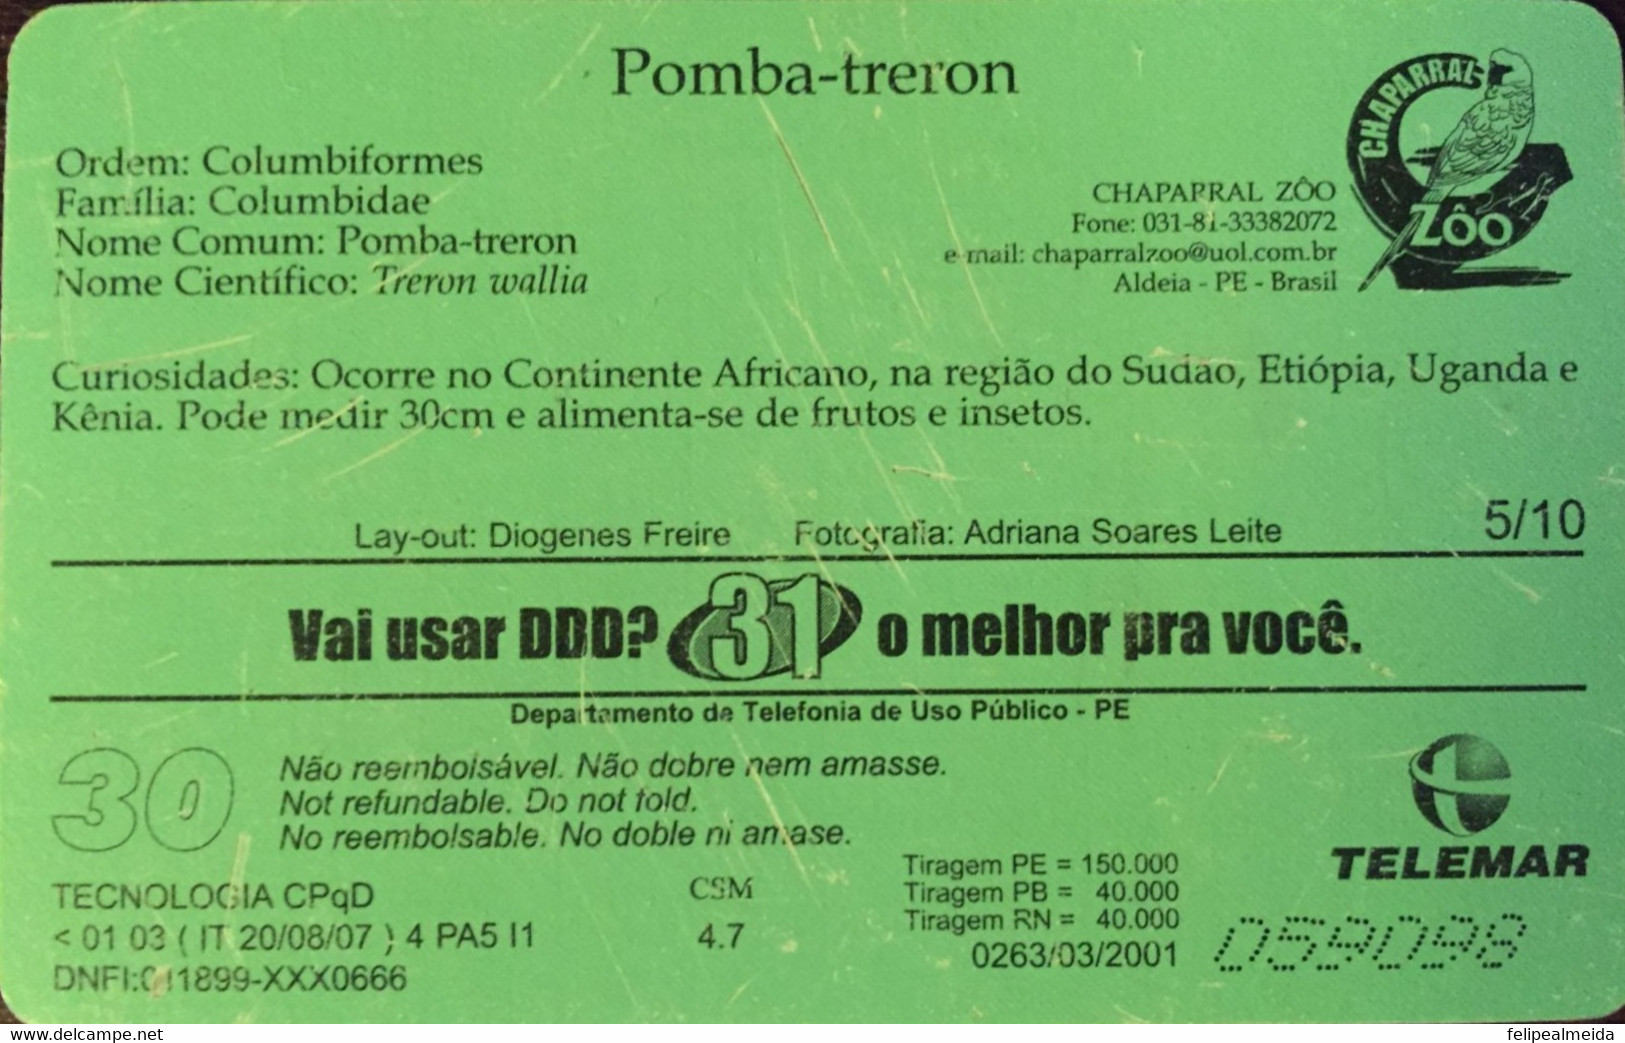 Phone Card Manufactured By Telemars In 2001 - Birds Special Series - Pomba-treron Species - Eagles & Birds Of Prey